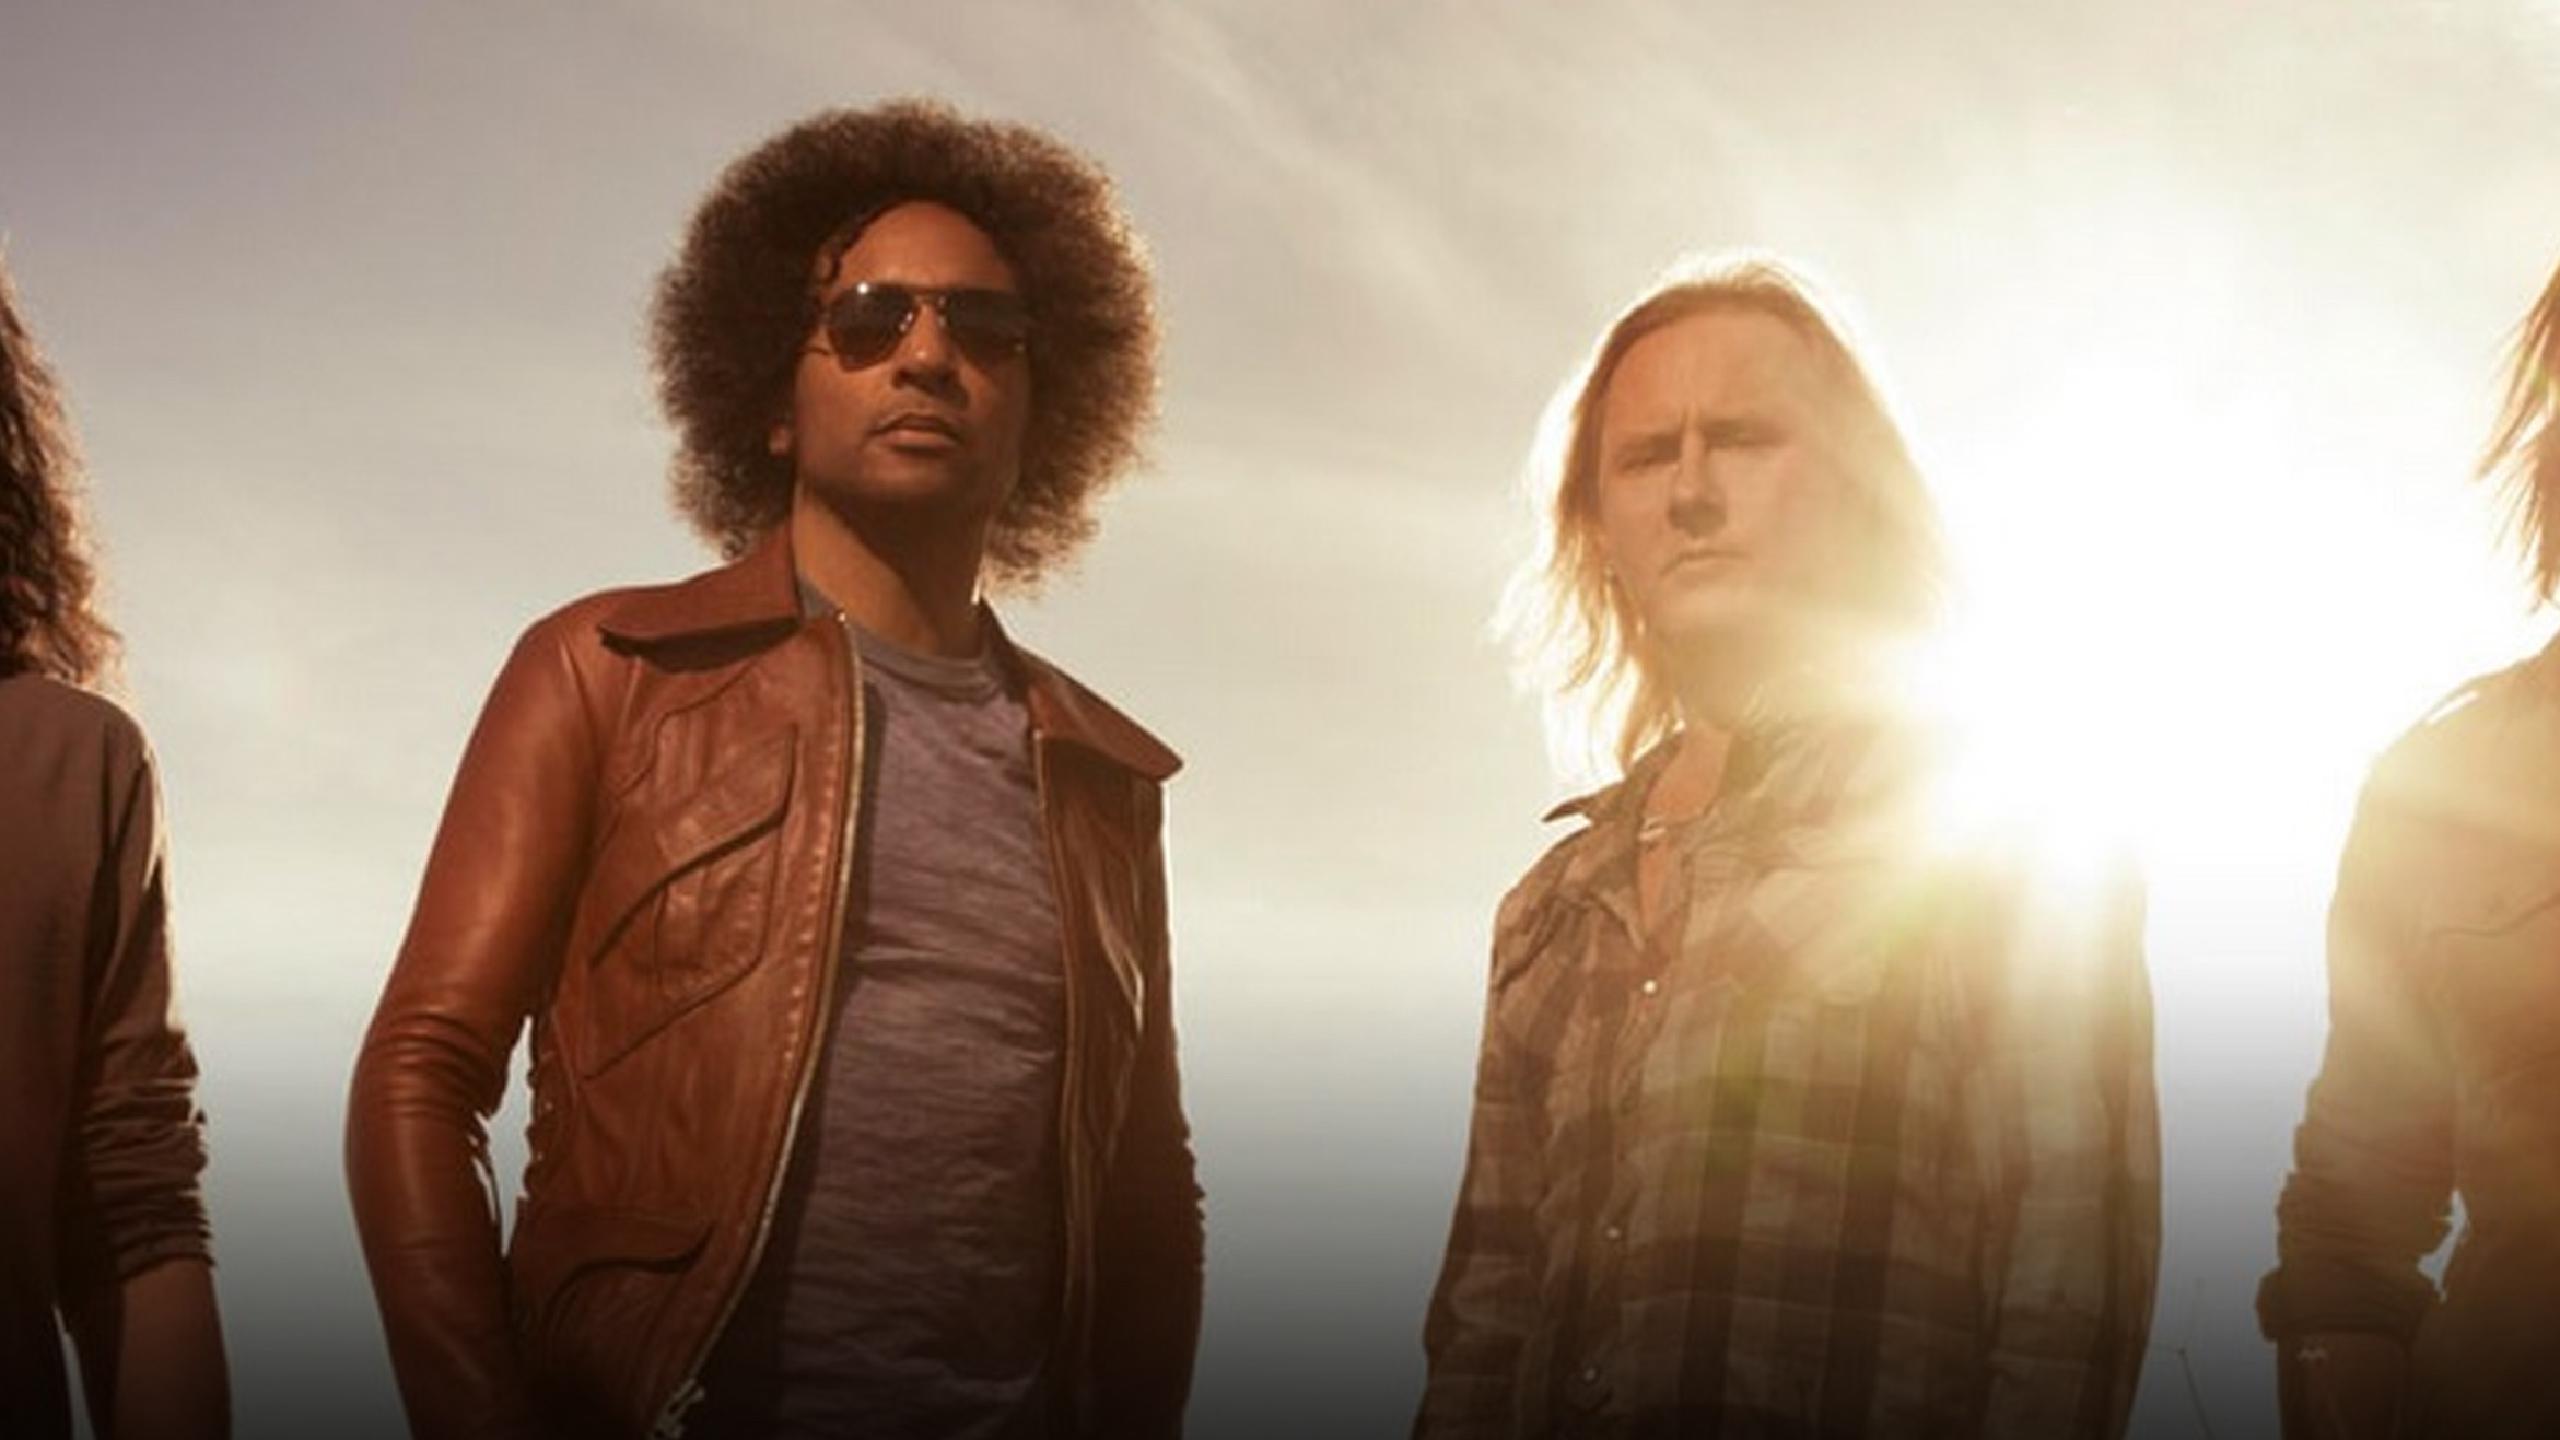 alice in chains uk tour dates